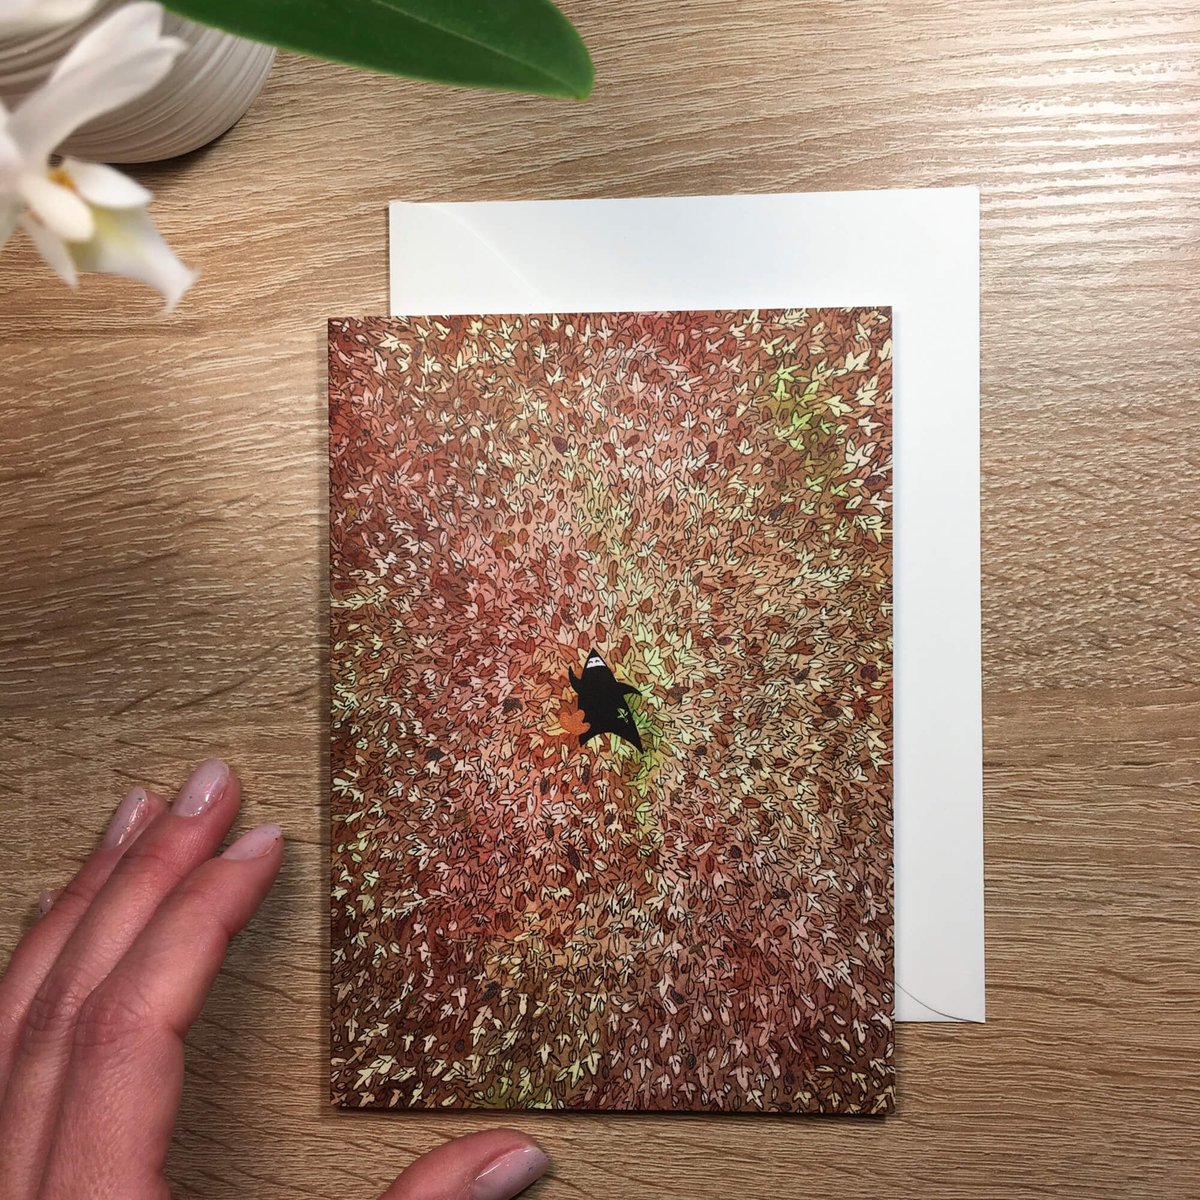 Card representing a season with autumn leaves